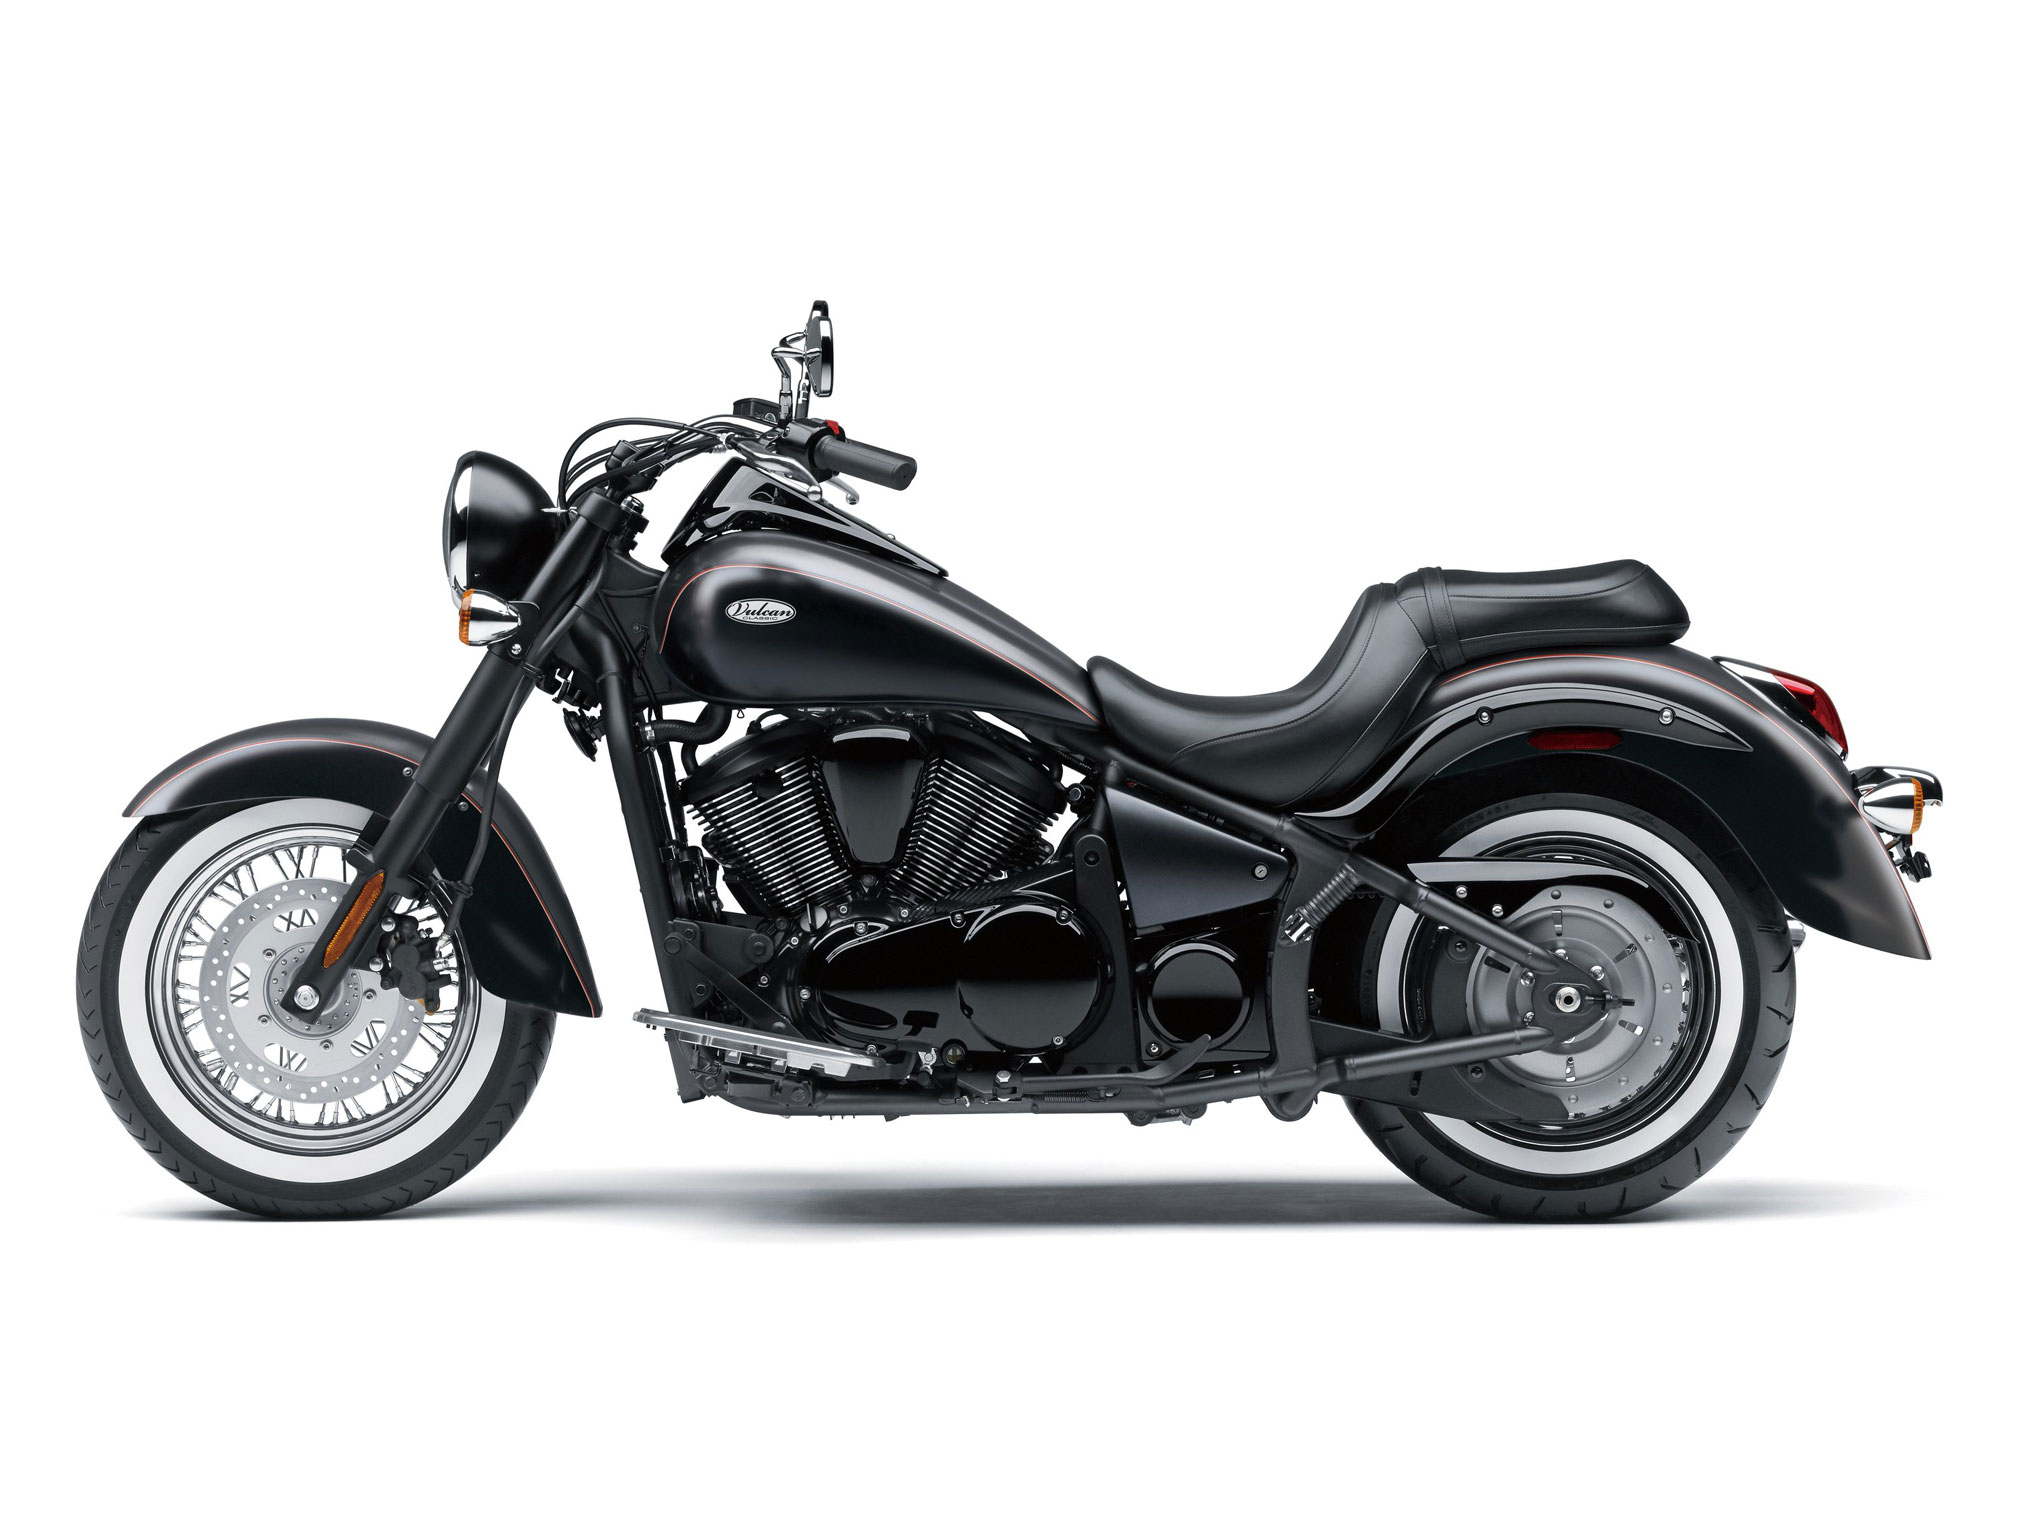 tempo helt bestemt talent 2018 Kawasaki Vulcan 900 Classic Review • Total Motorcycle